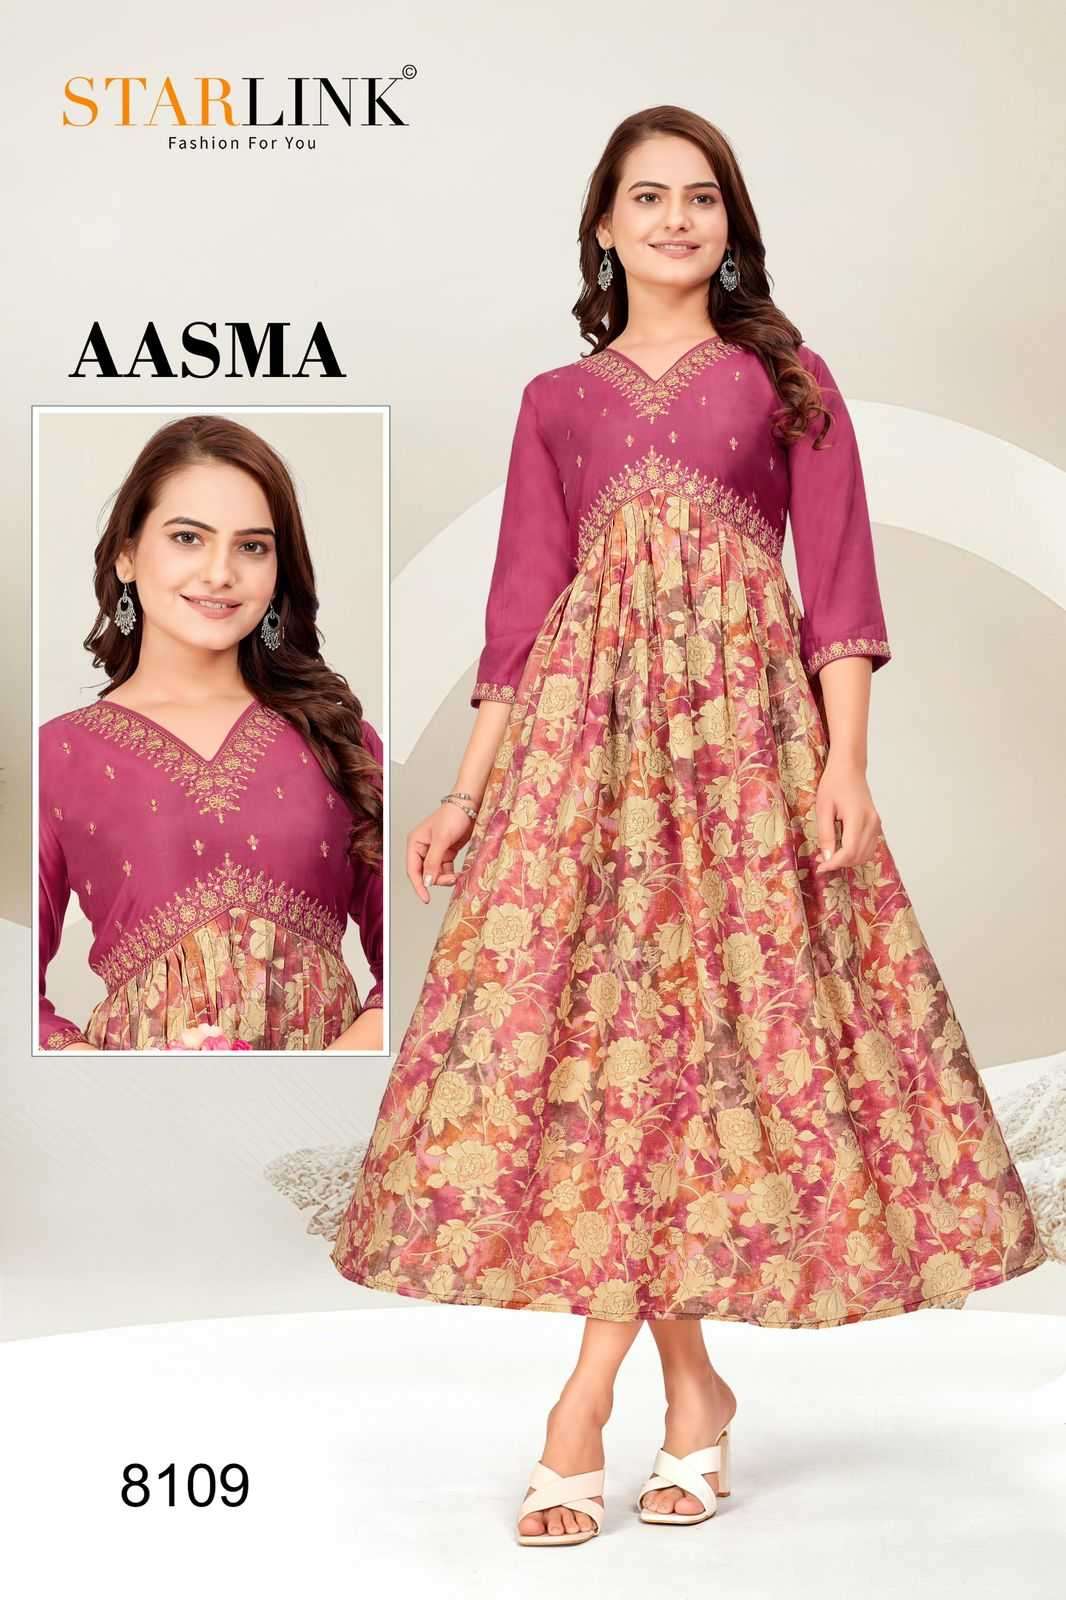 starlink aasma MODAL SILK WITH FOIL WITH EMBROIDERY WORK AALIYA PETTERN suit